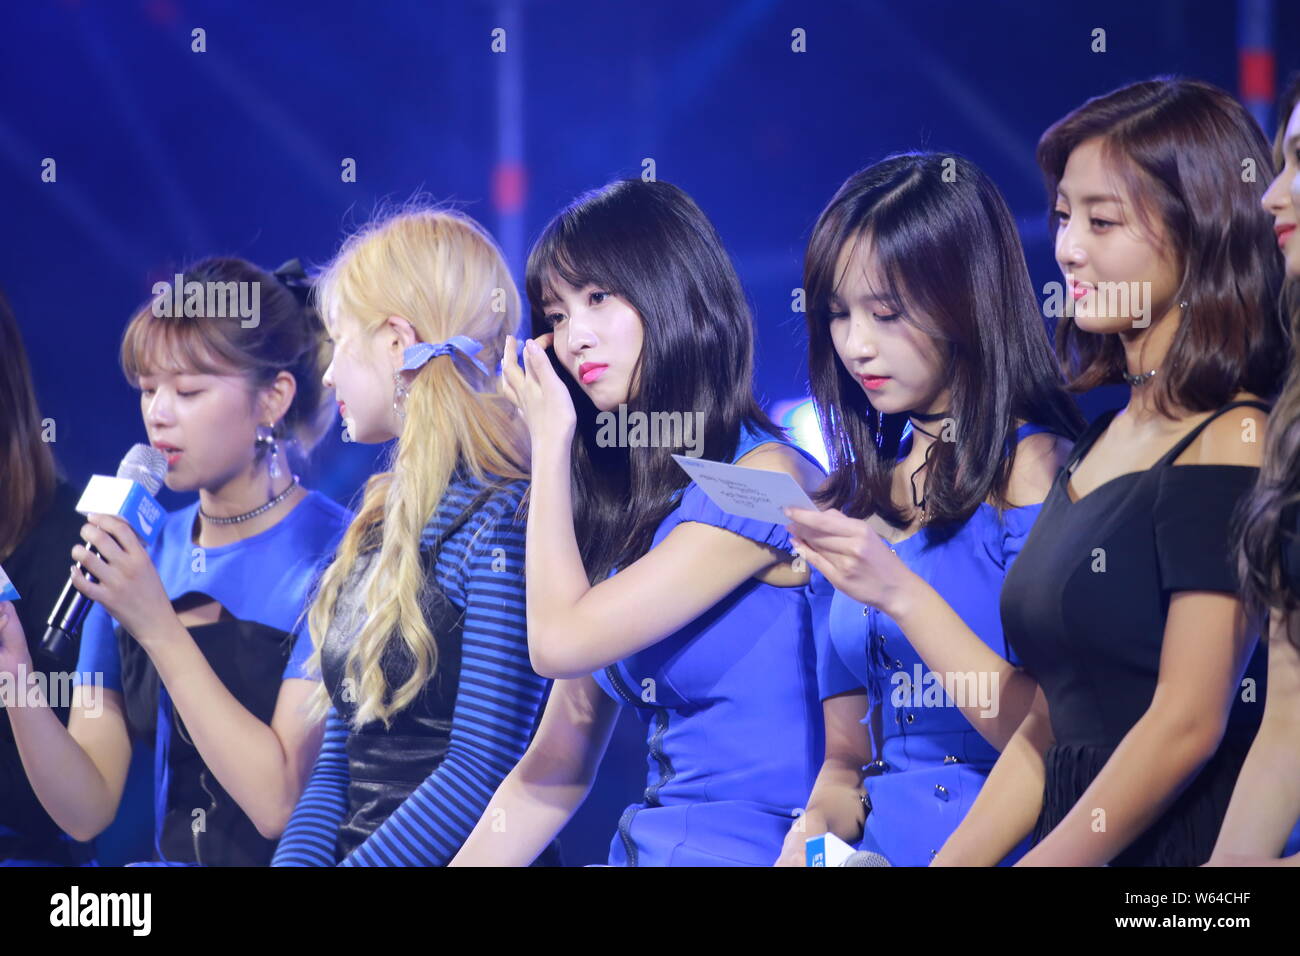 From Left Jeongyeon Dahyun Momo Mina Jihyo And Sana Of South Korean Girl Group Twice Attend The Pocari Challenge Teen Festa In Seoul South Kor Stock Photo Alamy Mina was born in texas but she moved to japan when she was a toddler. https www alamy com from left jeongyeon dahyun momo mina jihyo and sana of south korean girl group twice attend the pocari challenge teen festa in seoul south kor image261941163 html